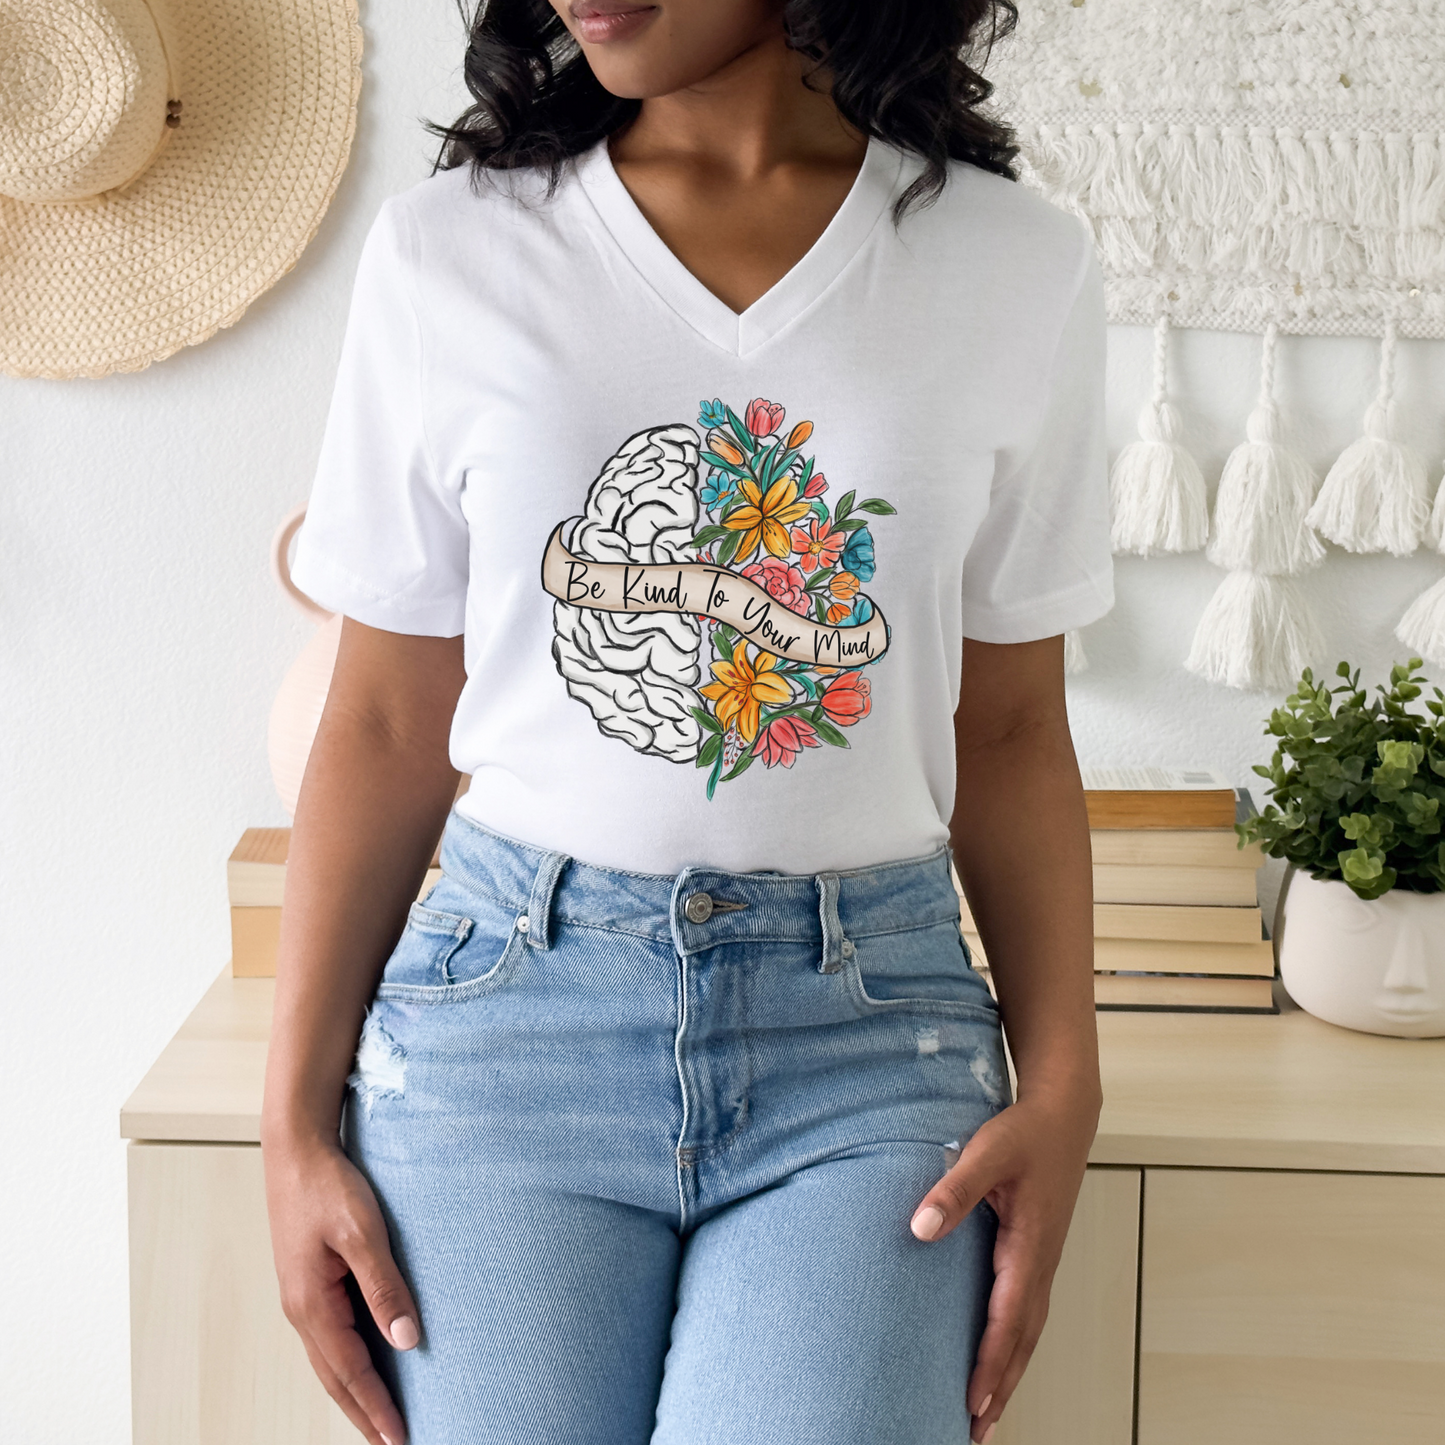 Be Kind to Your Mind Tee